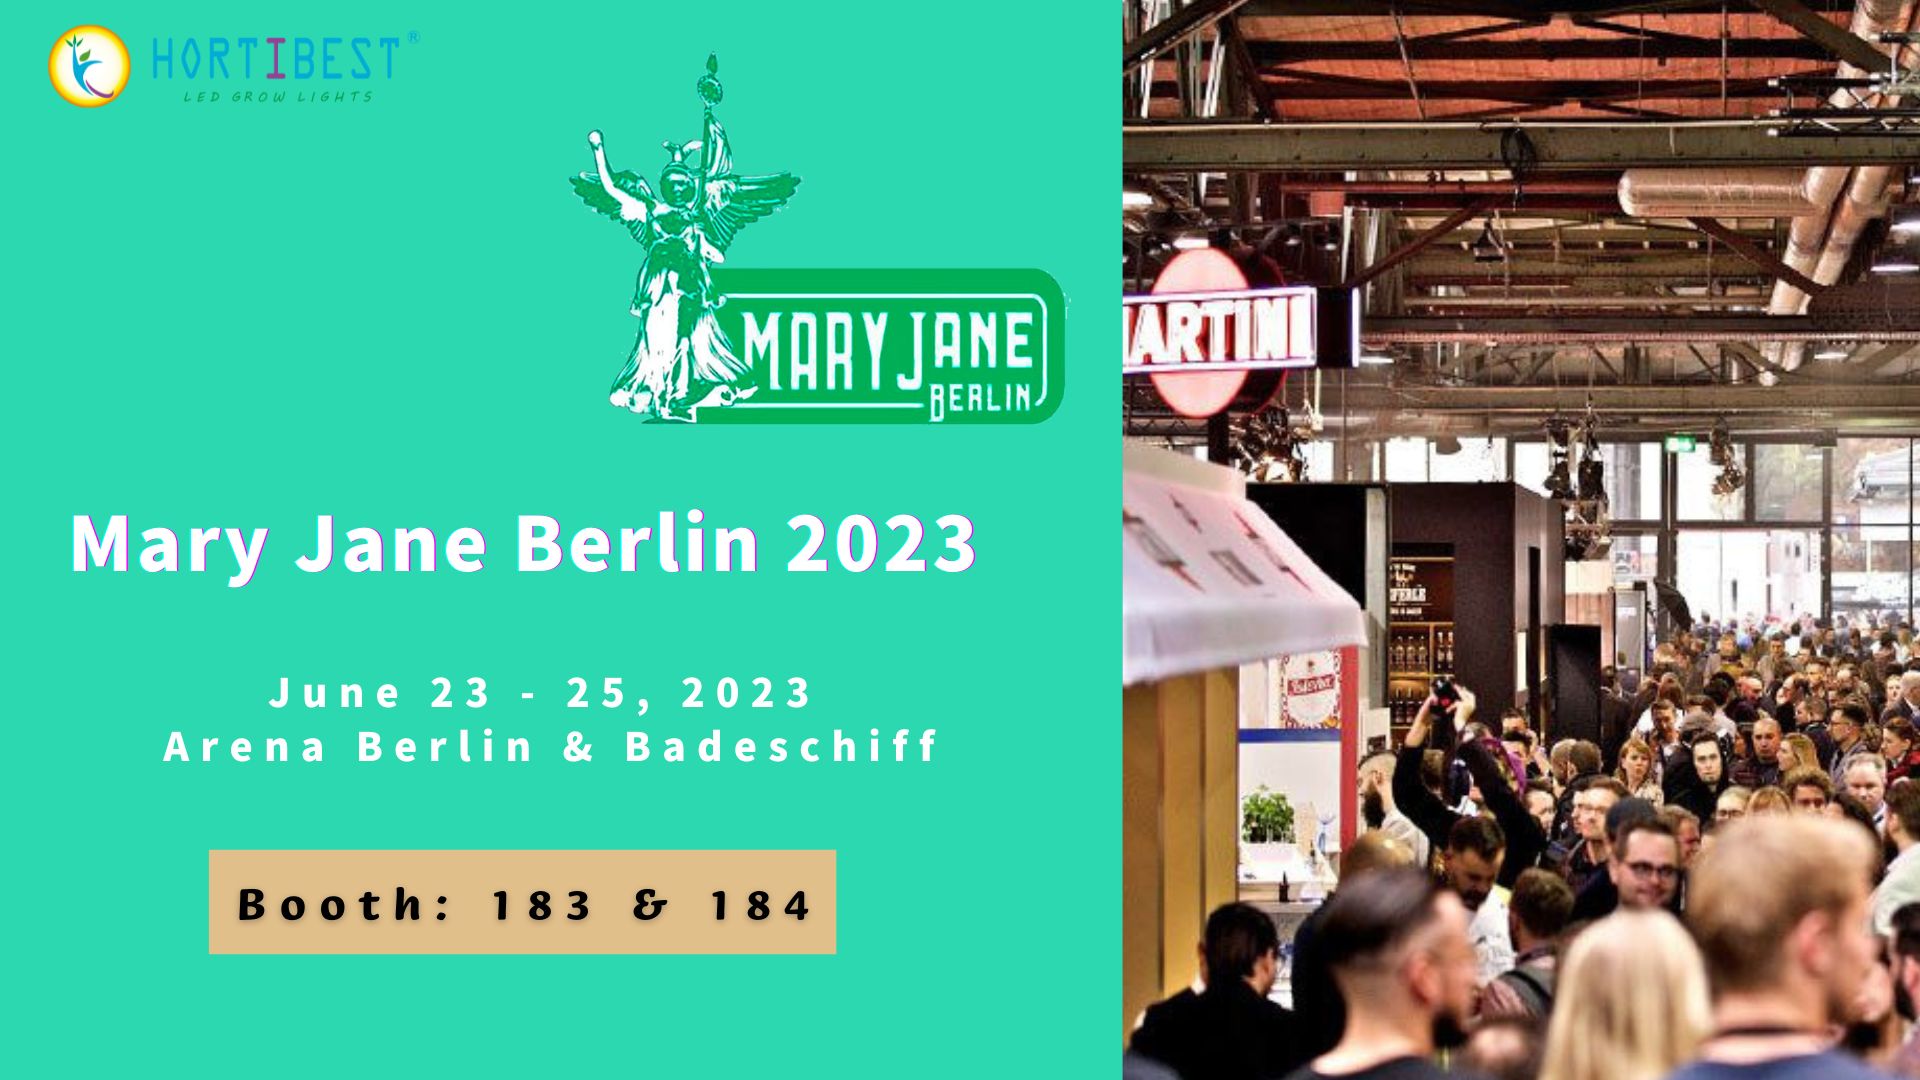 Mary Jane Berlin 2023 is One Month to Go!